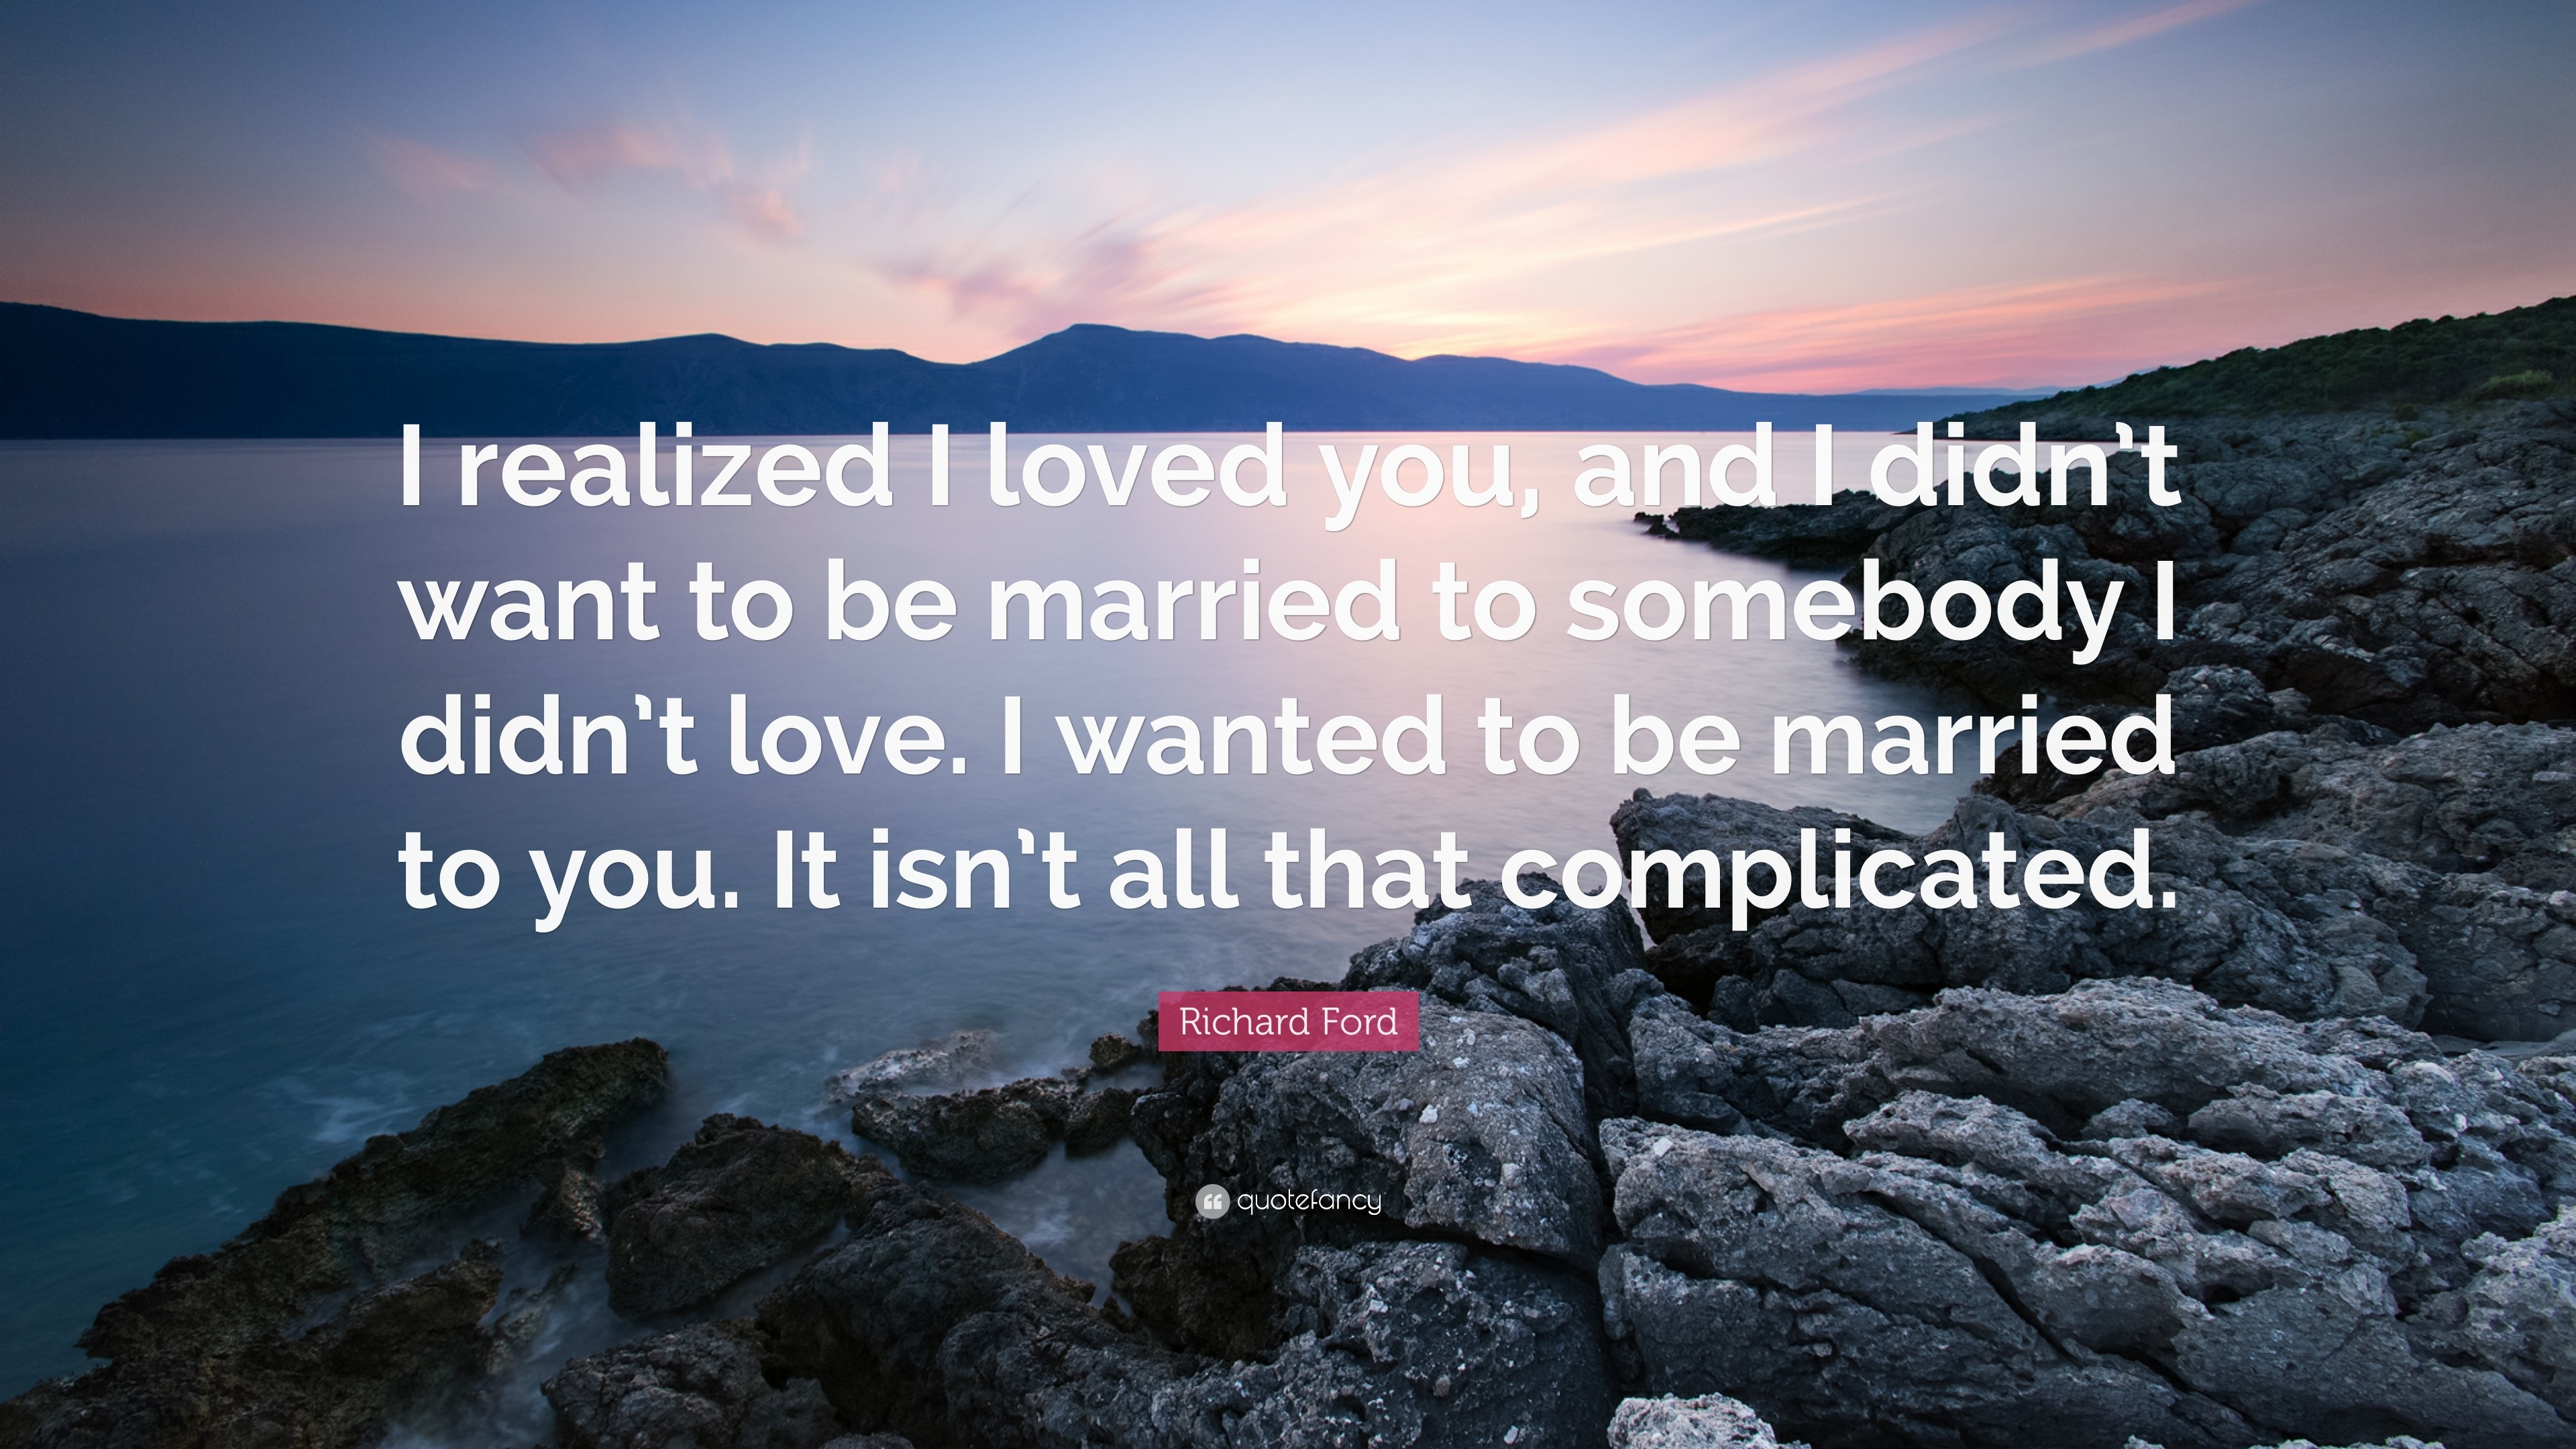 Richard Ford Quote “I realized I loved you and I didn t